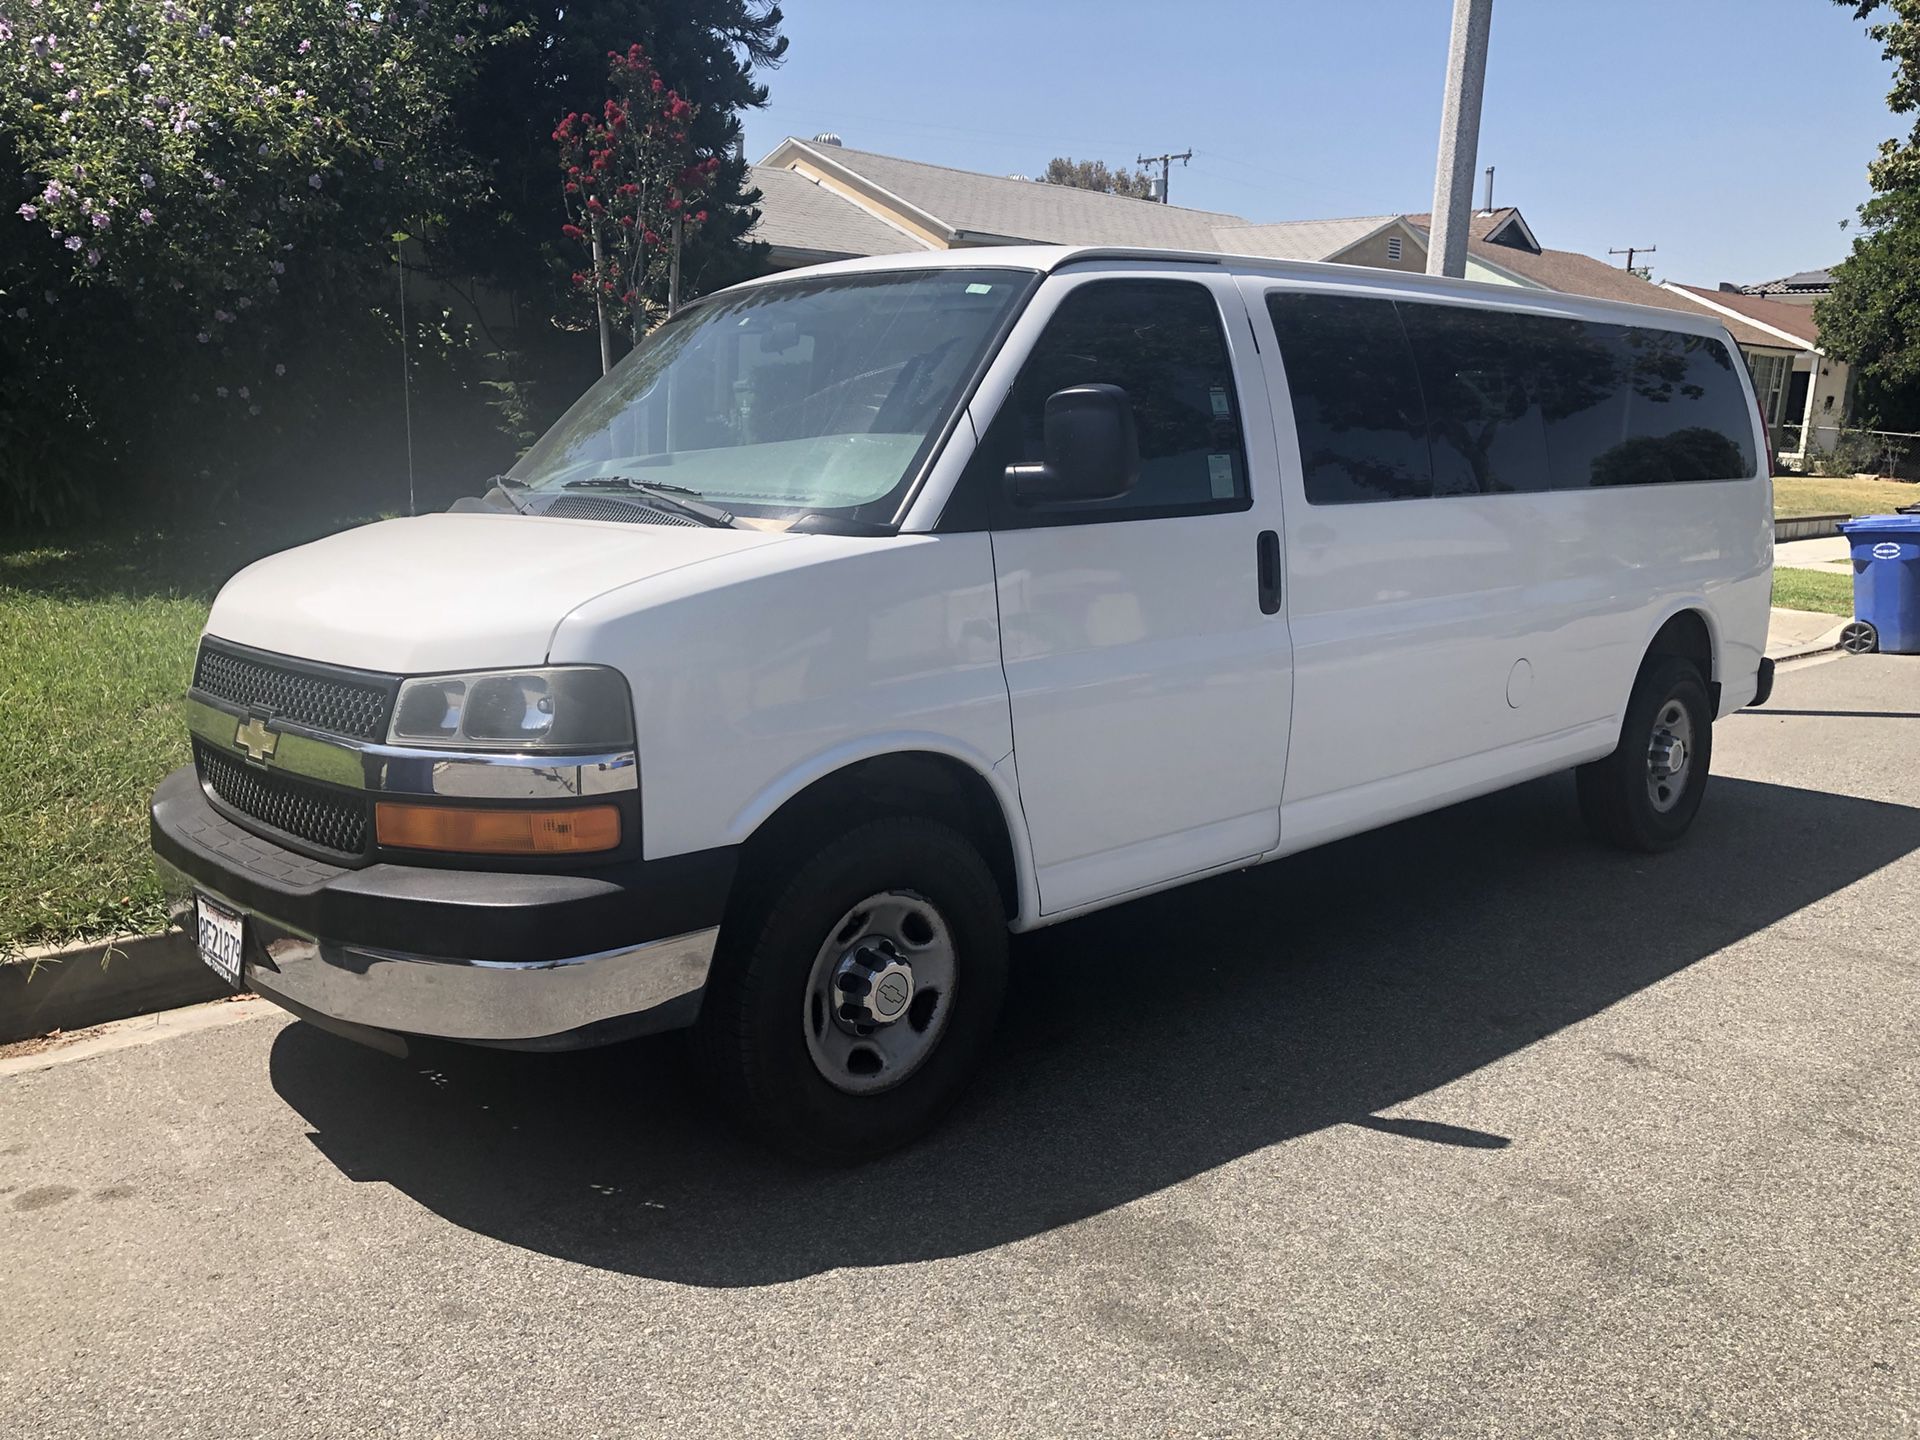 2500 Down - 92k Miles - Chevy Express Van - Clean title- Smogged- tags 2020